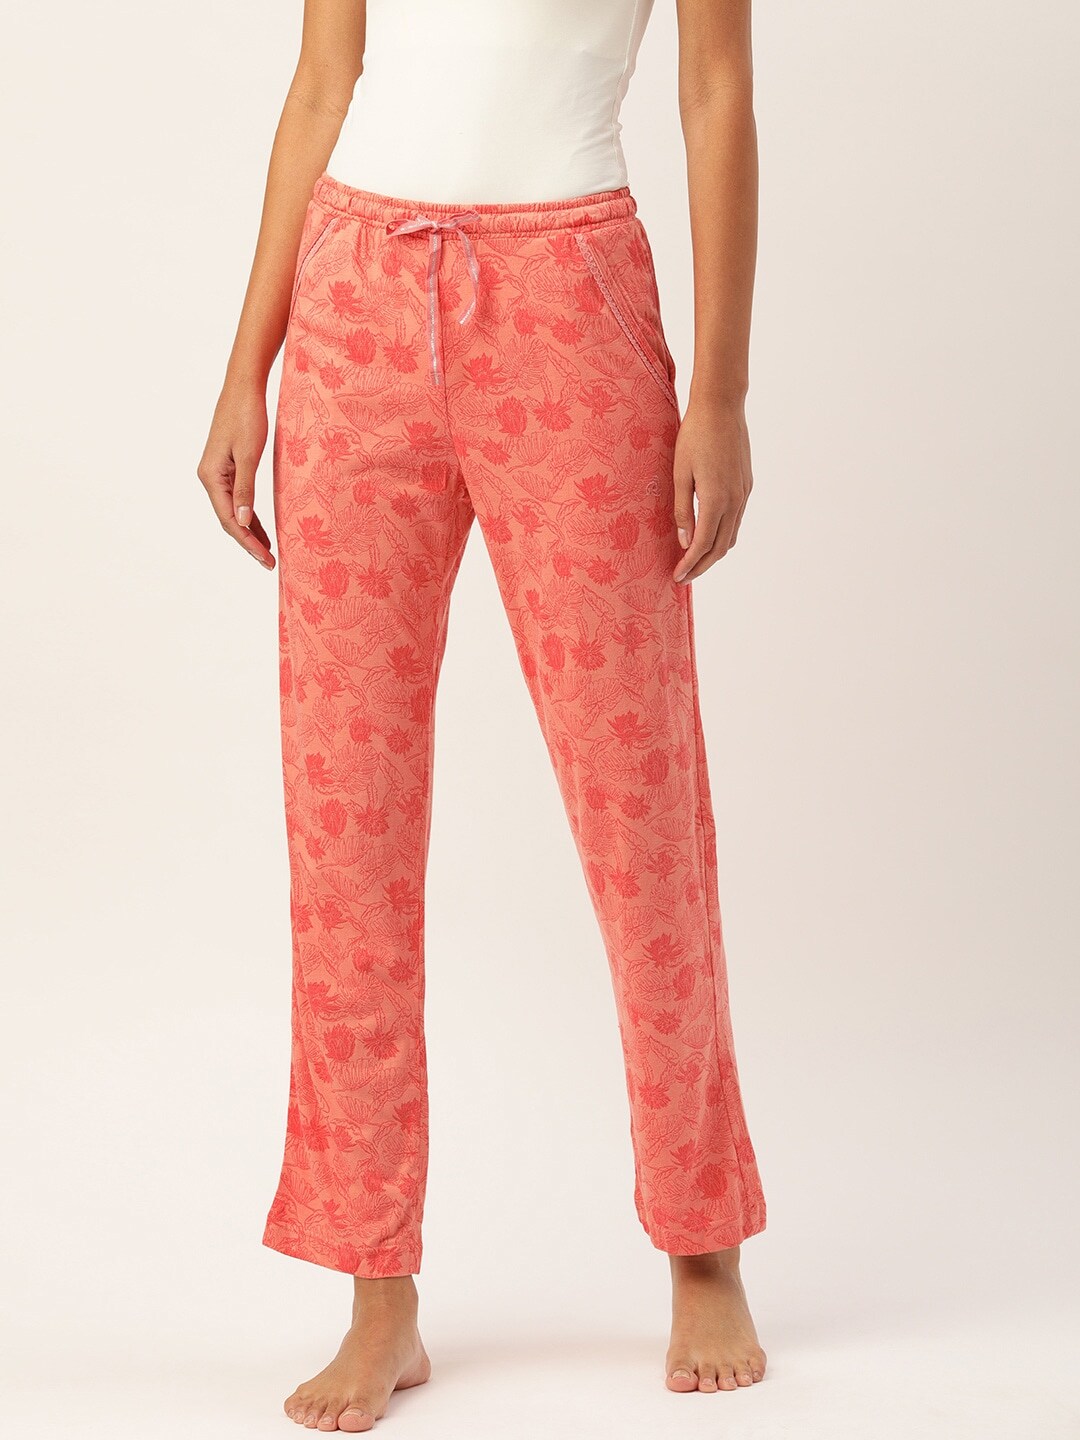 Jockey Women Peach Floral Printed Relax Lounge Pants Price in India